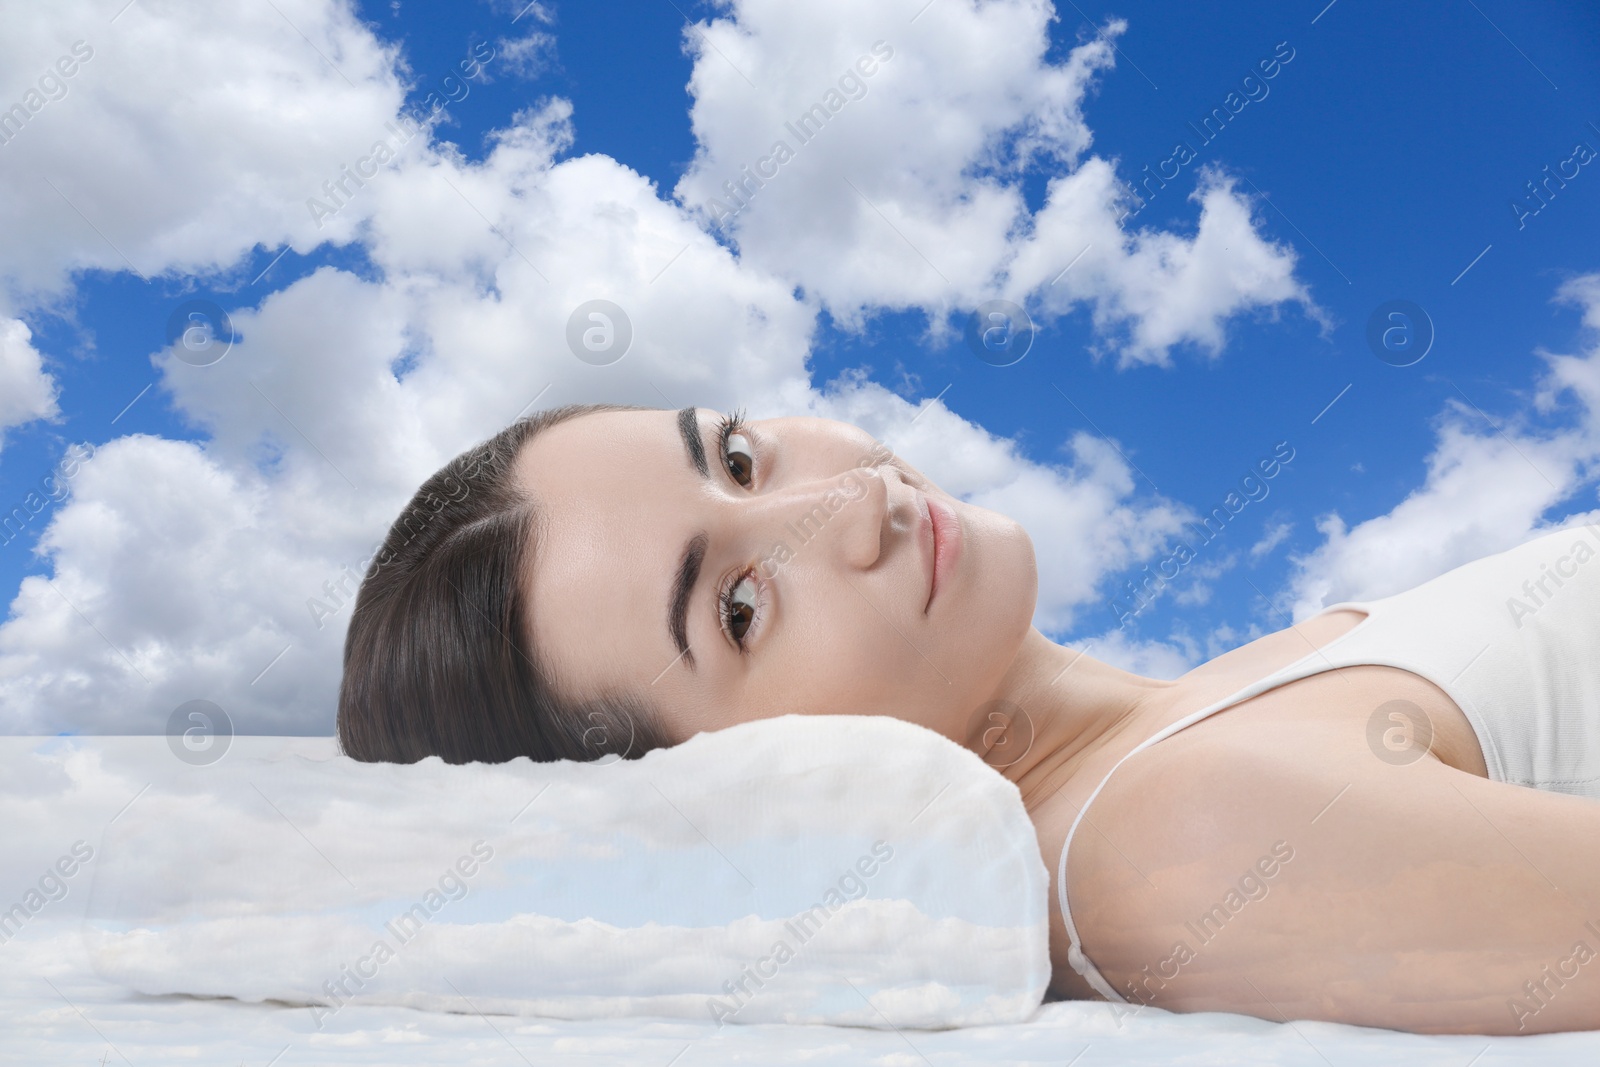 Image of Woman lying on orthopedic pillow against blue sky